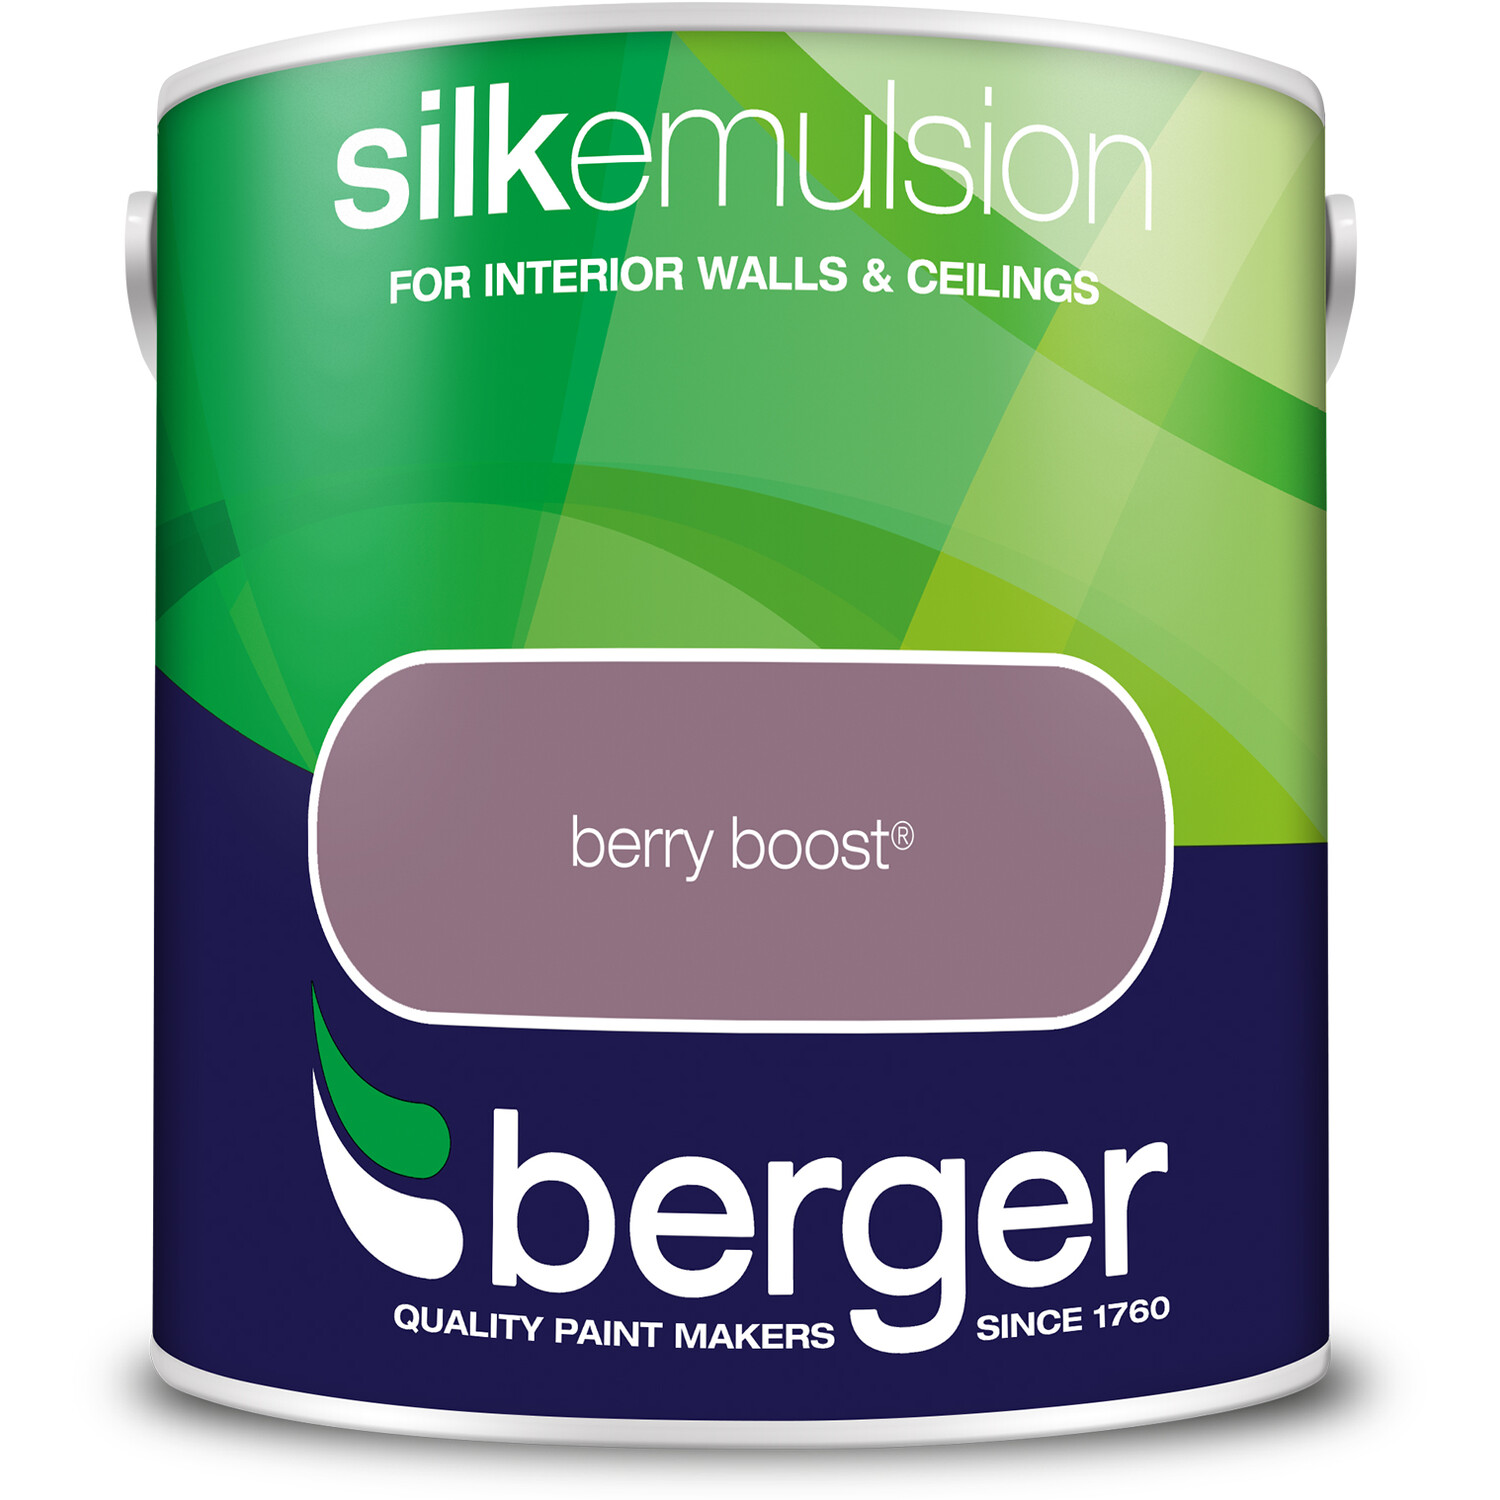 Berger Walls & Ceilings Berry Boost Silk Emulsion Paint 2.5L Image 2